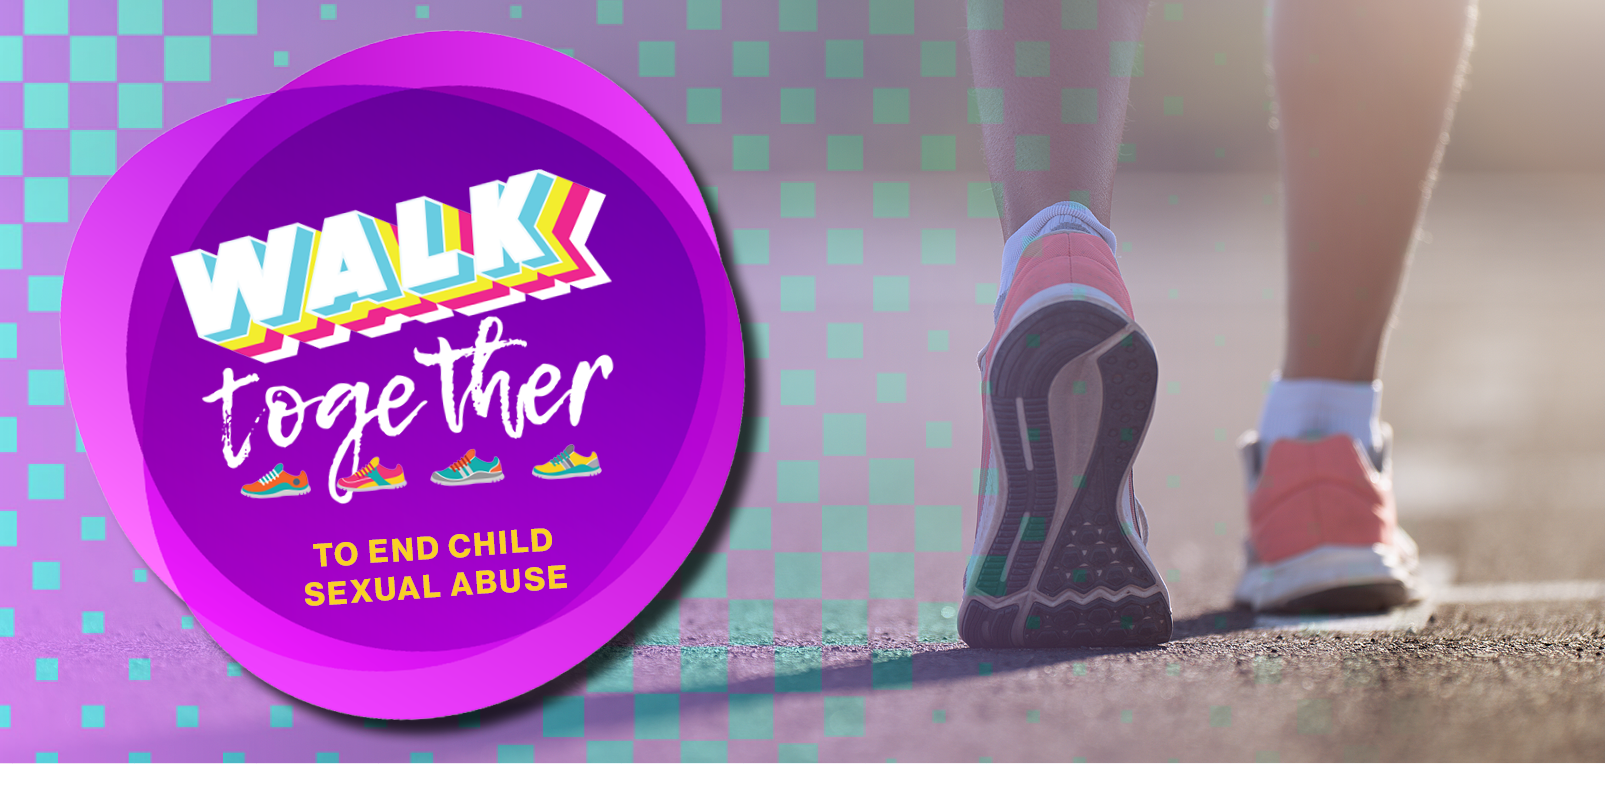 Walk Together to End Child Sexual Abuse.